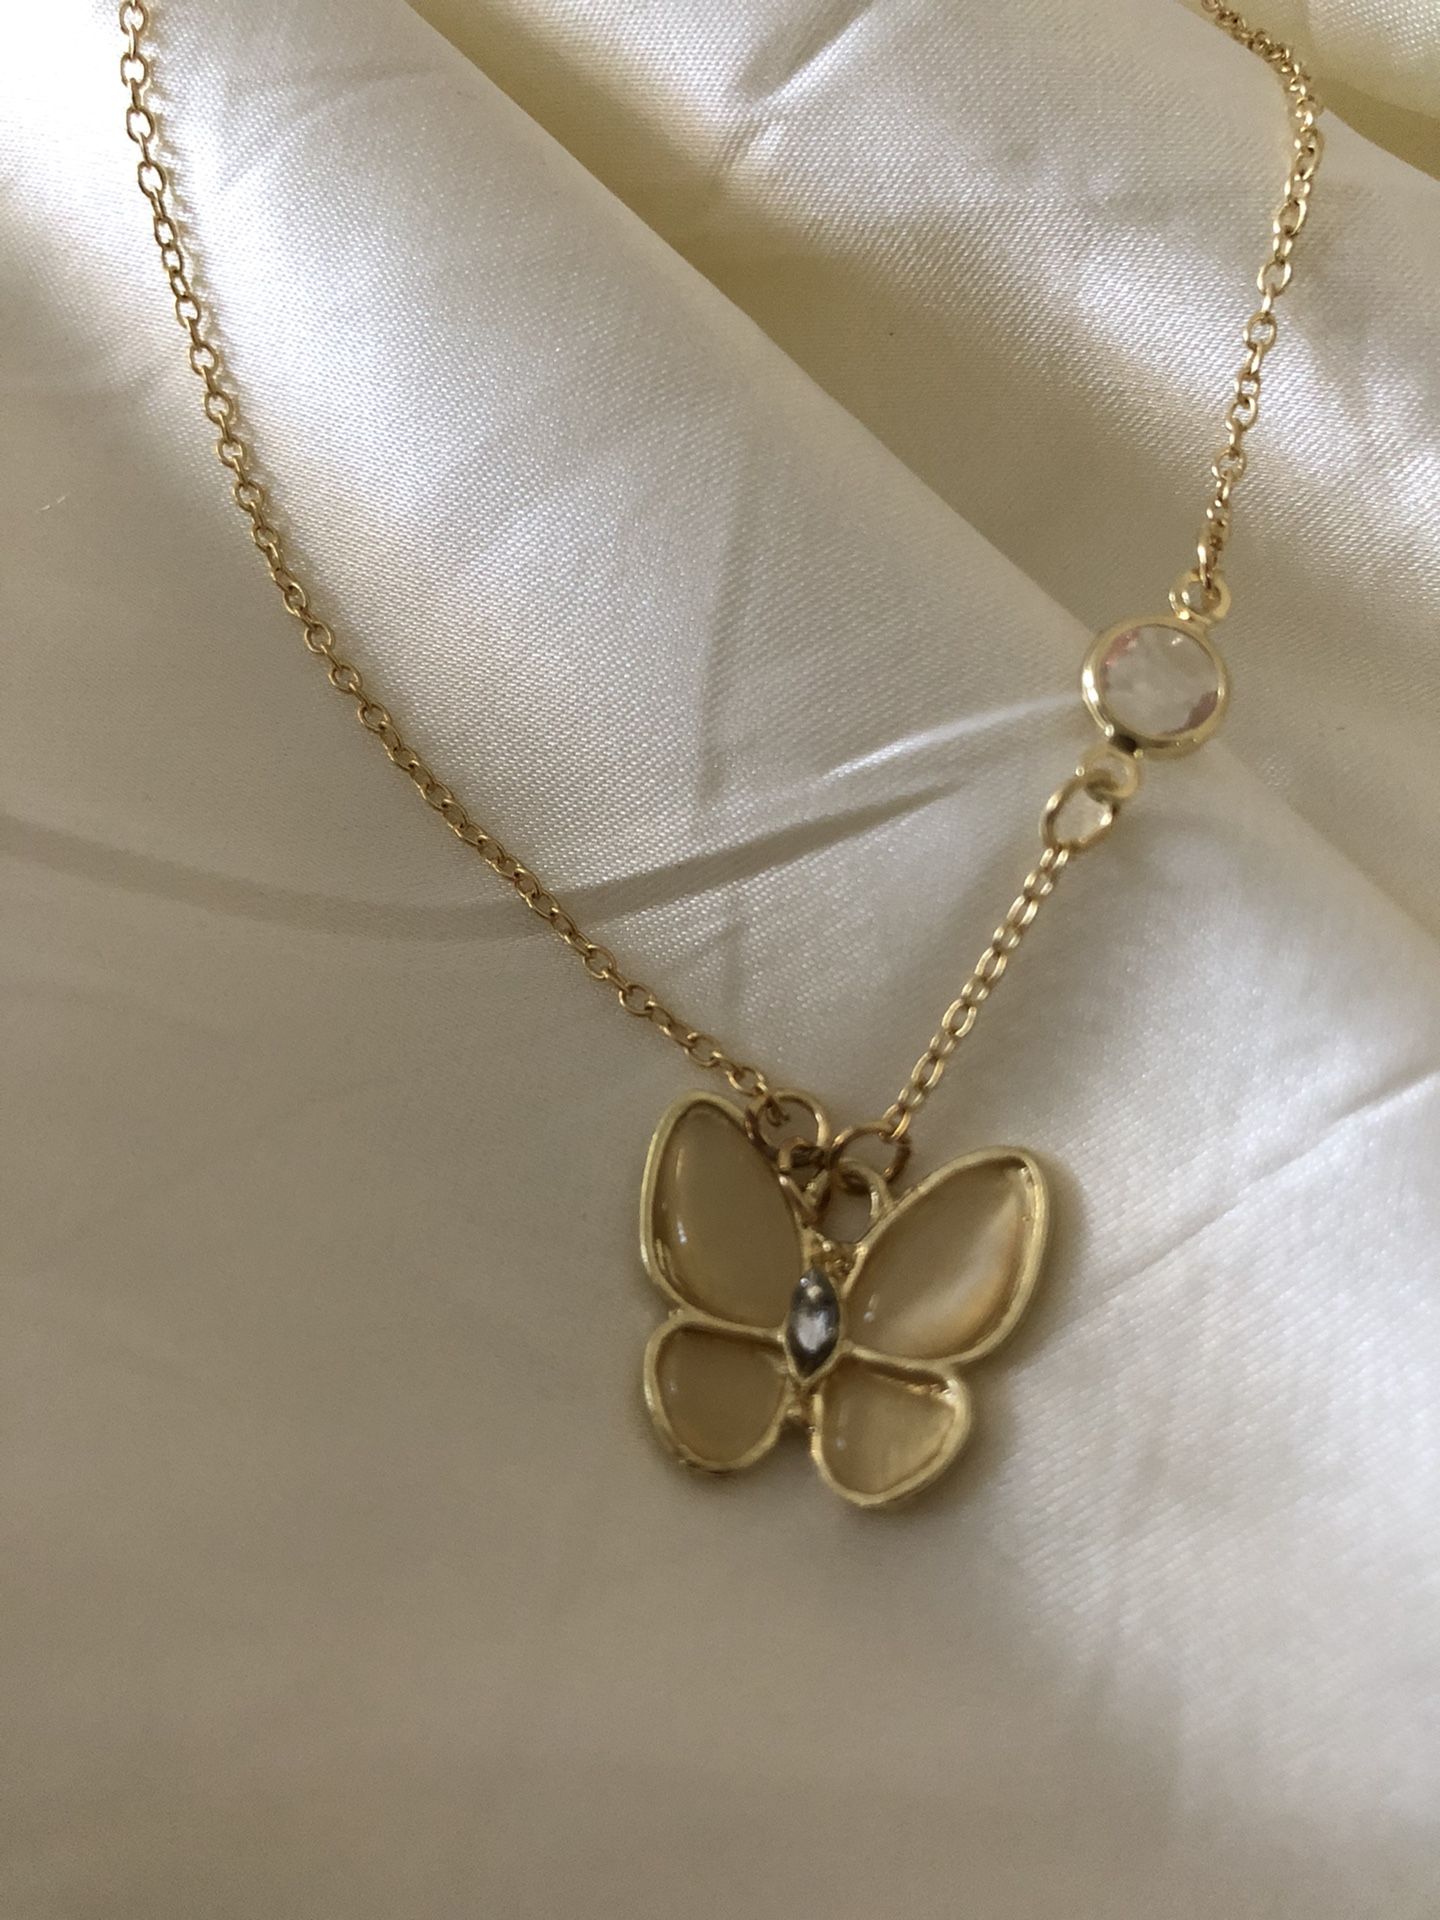 Butterfly 🦋 Necklace 